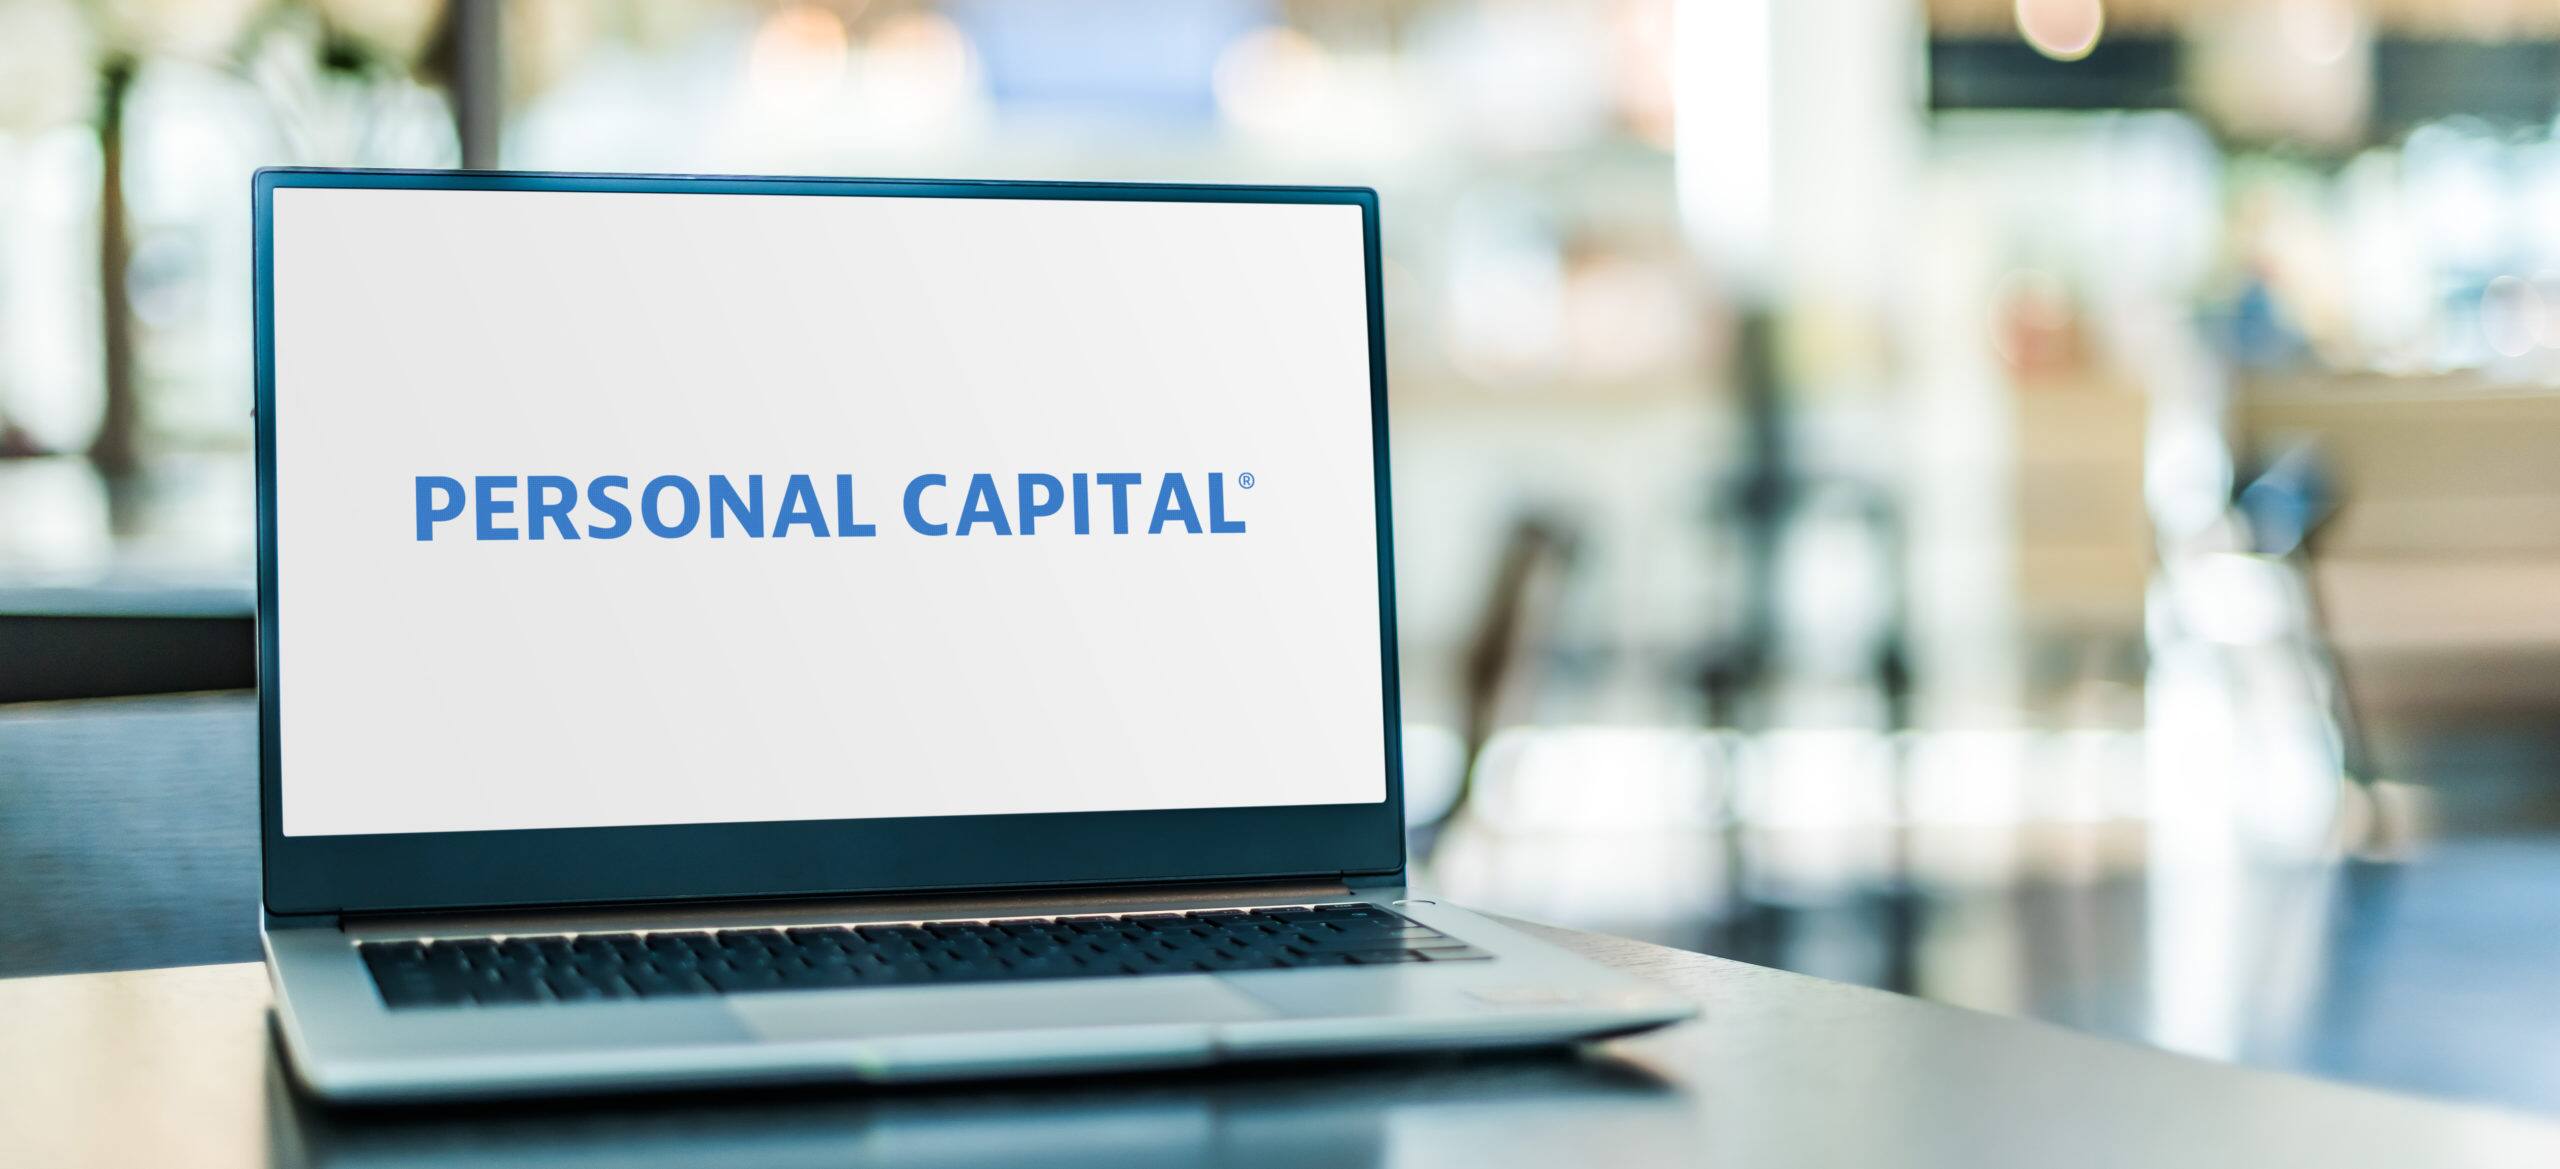 personal capital review